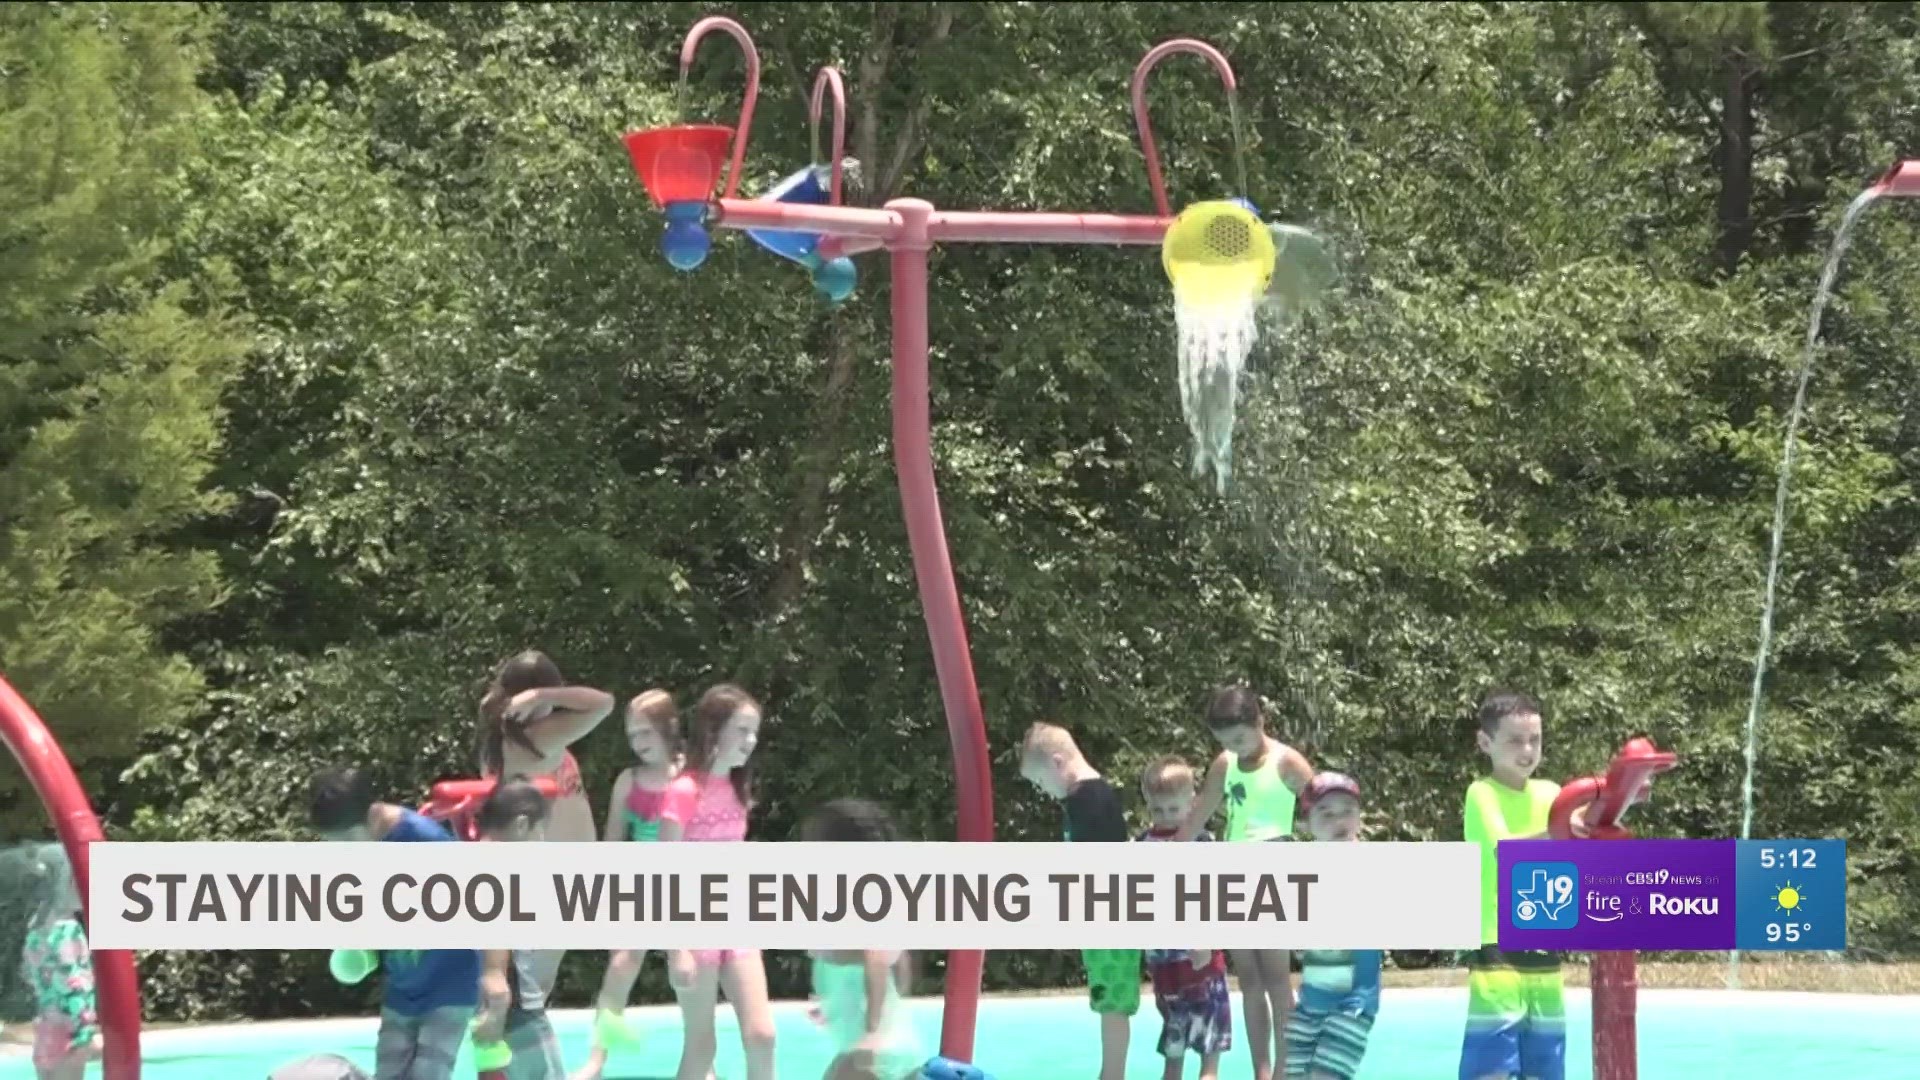 Despite the excessive heat, it is not stopping people from enjoying the outdoors.